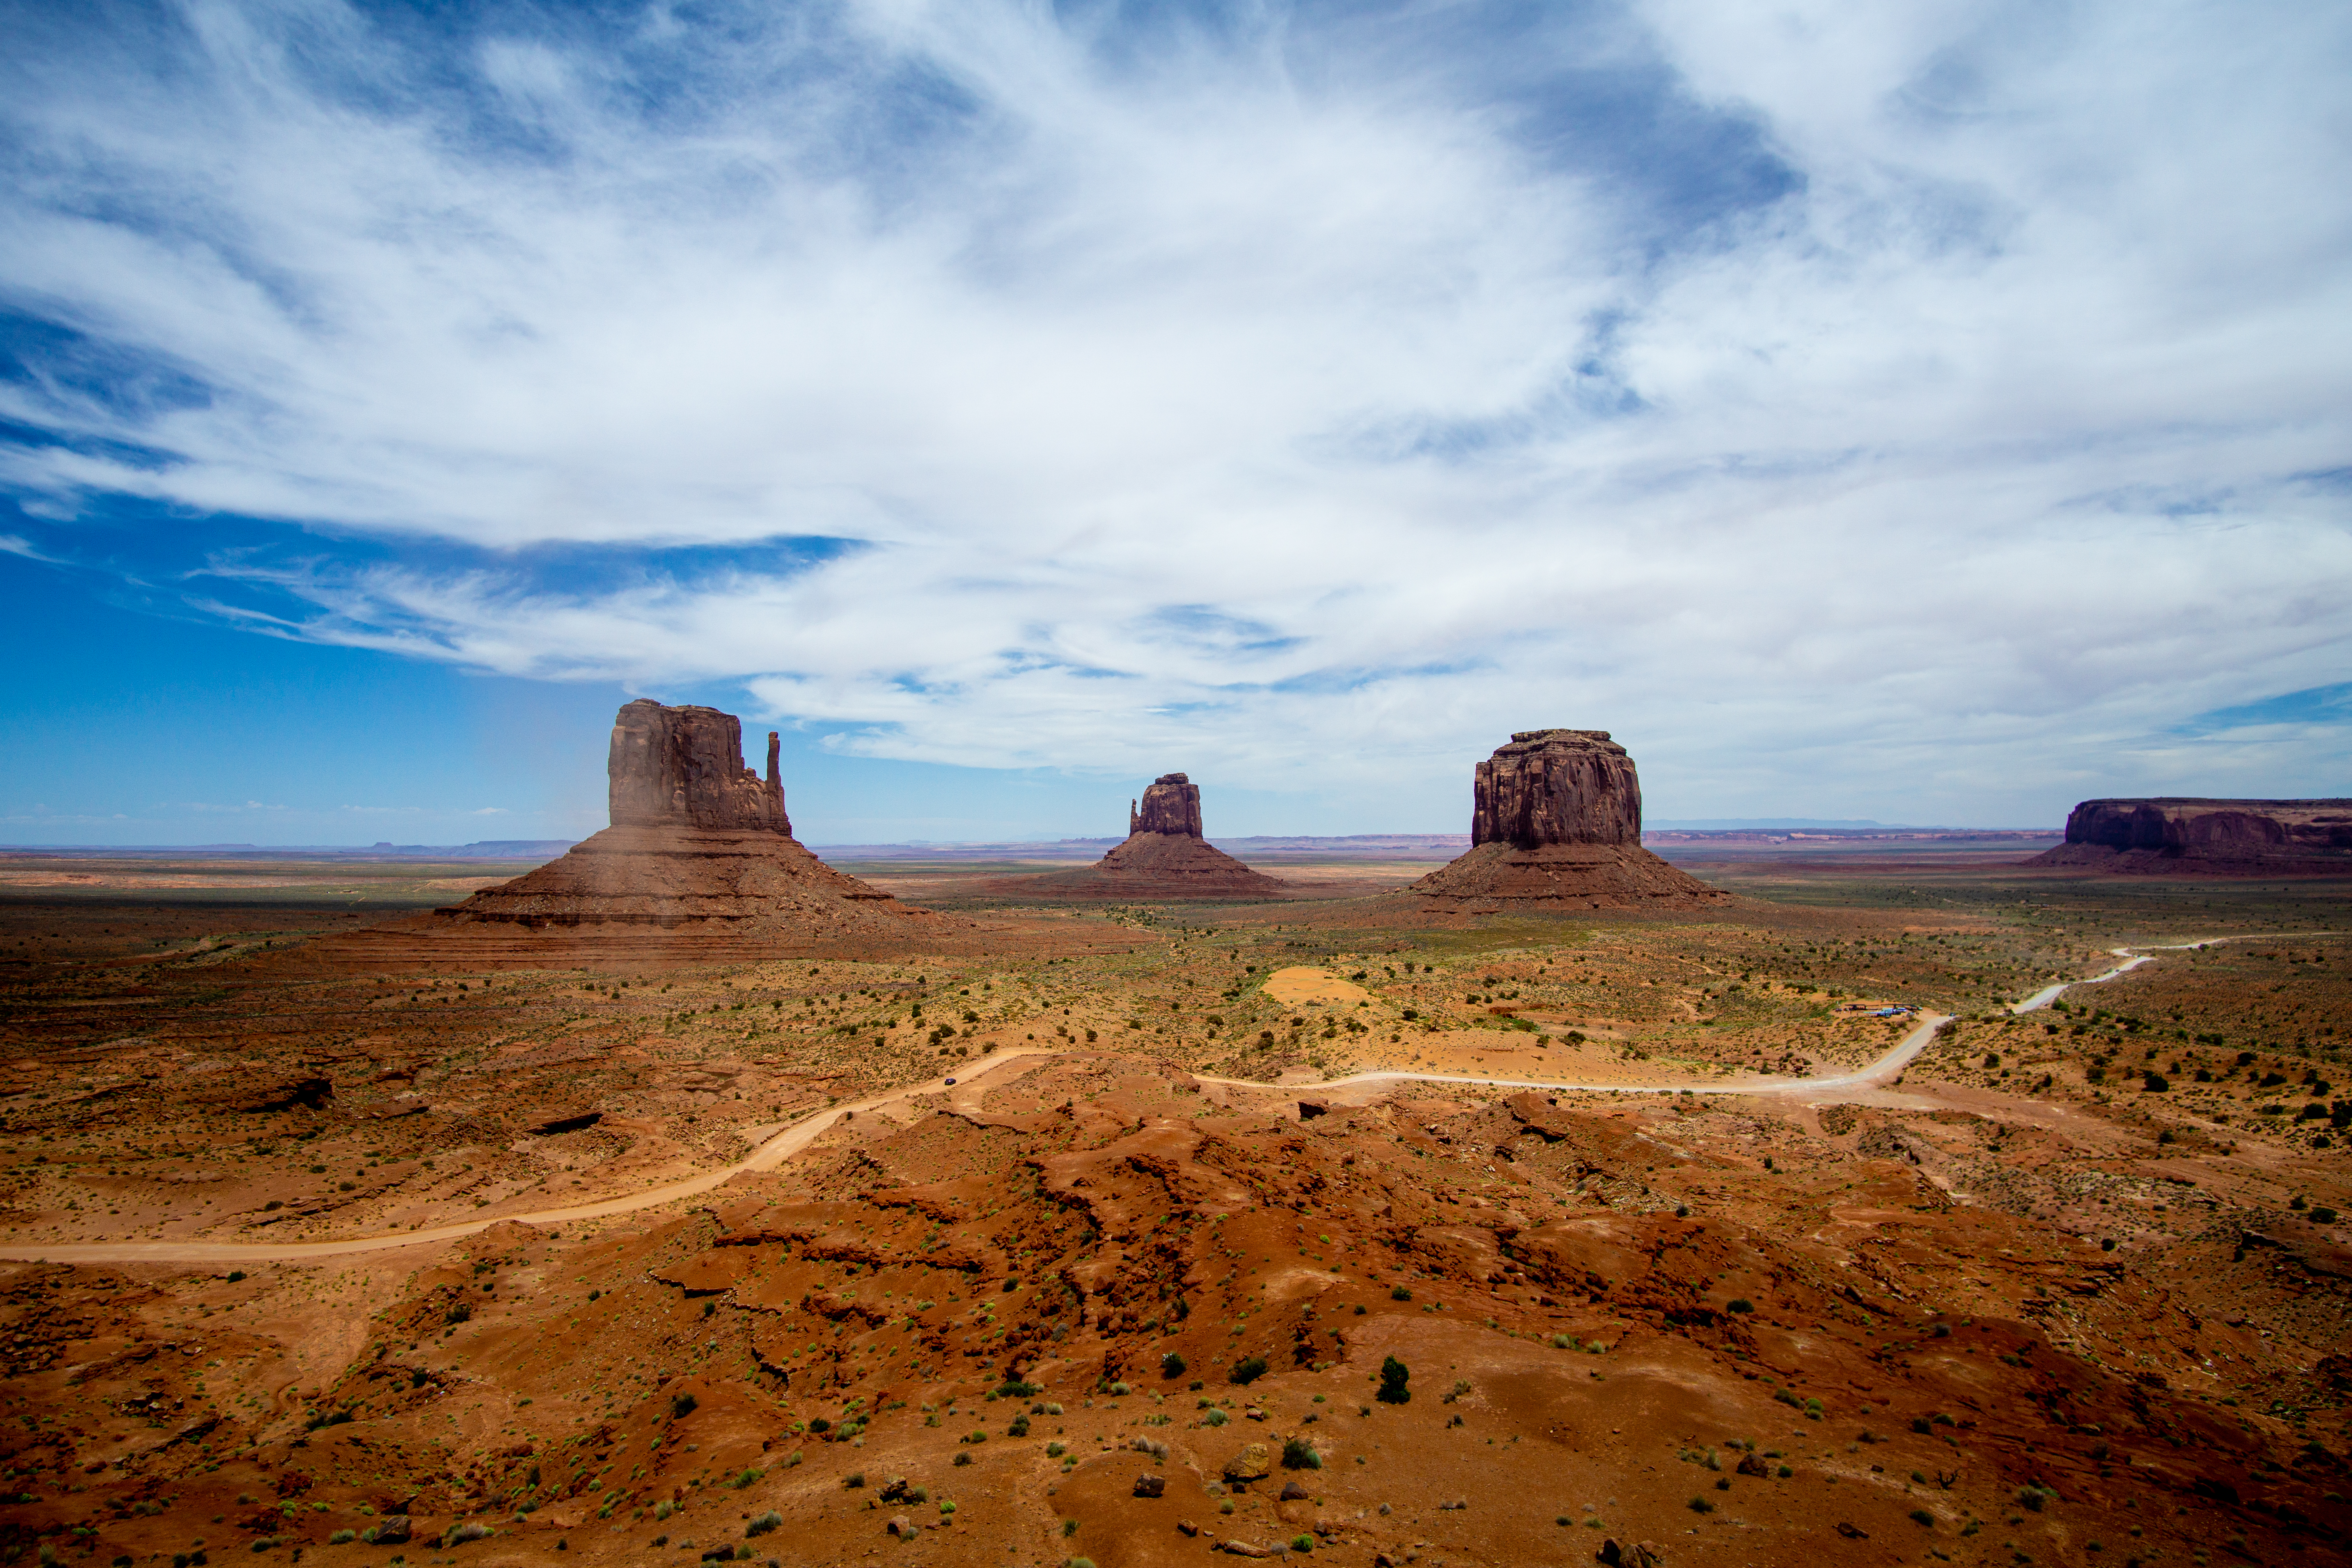 General 5930x3953 landscape desert road brown red clouds Monument Valley